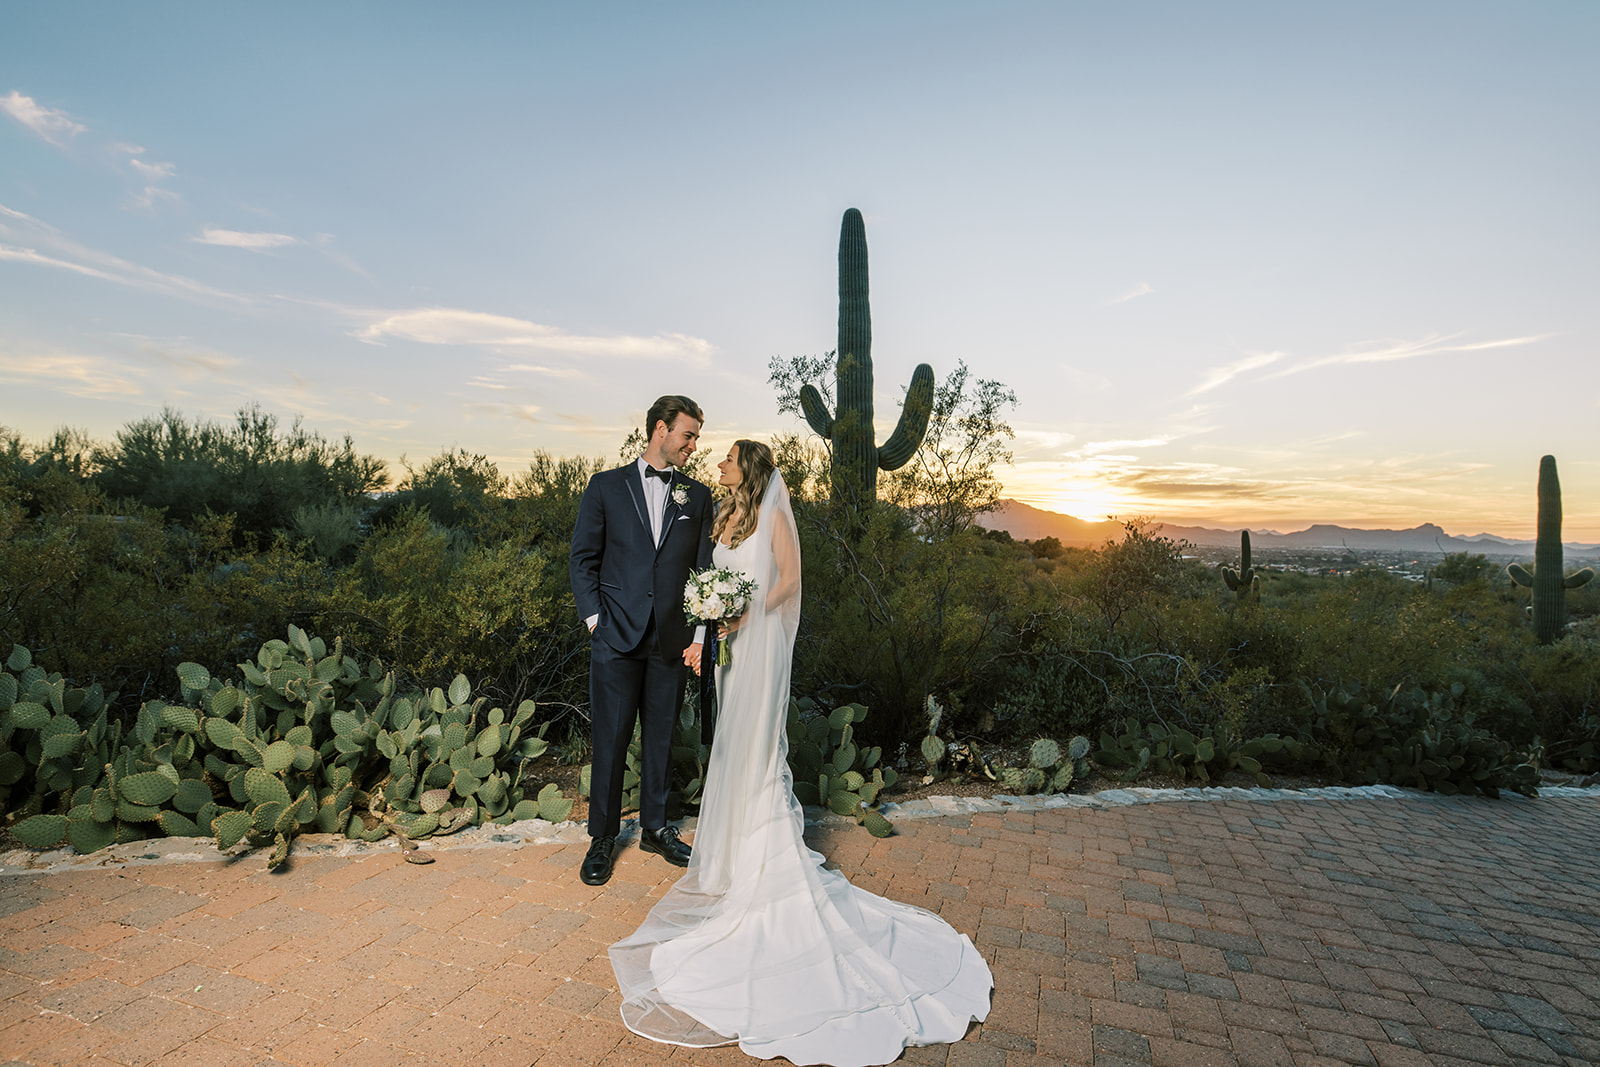 Bride and Groom with bouquet, wedding photography in Tucson, Arizona at sunset in Sonoran Desert